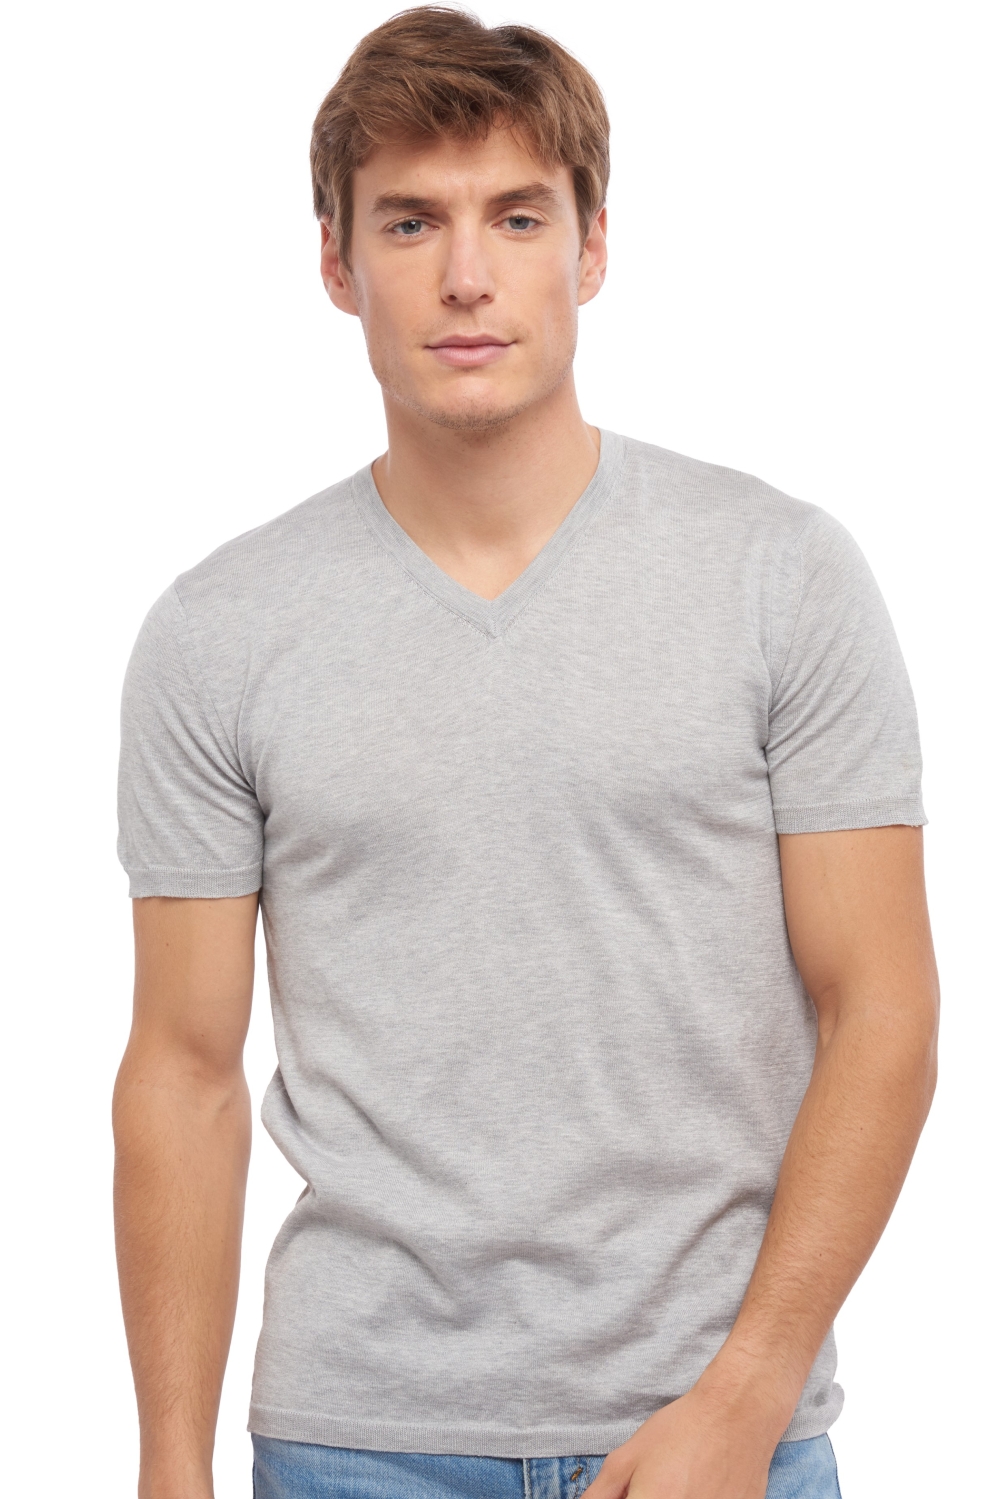 Coton Giza 45 pull homme michael flanelle xs